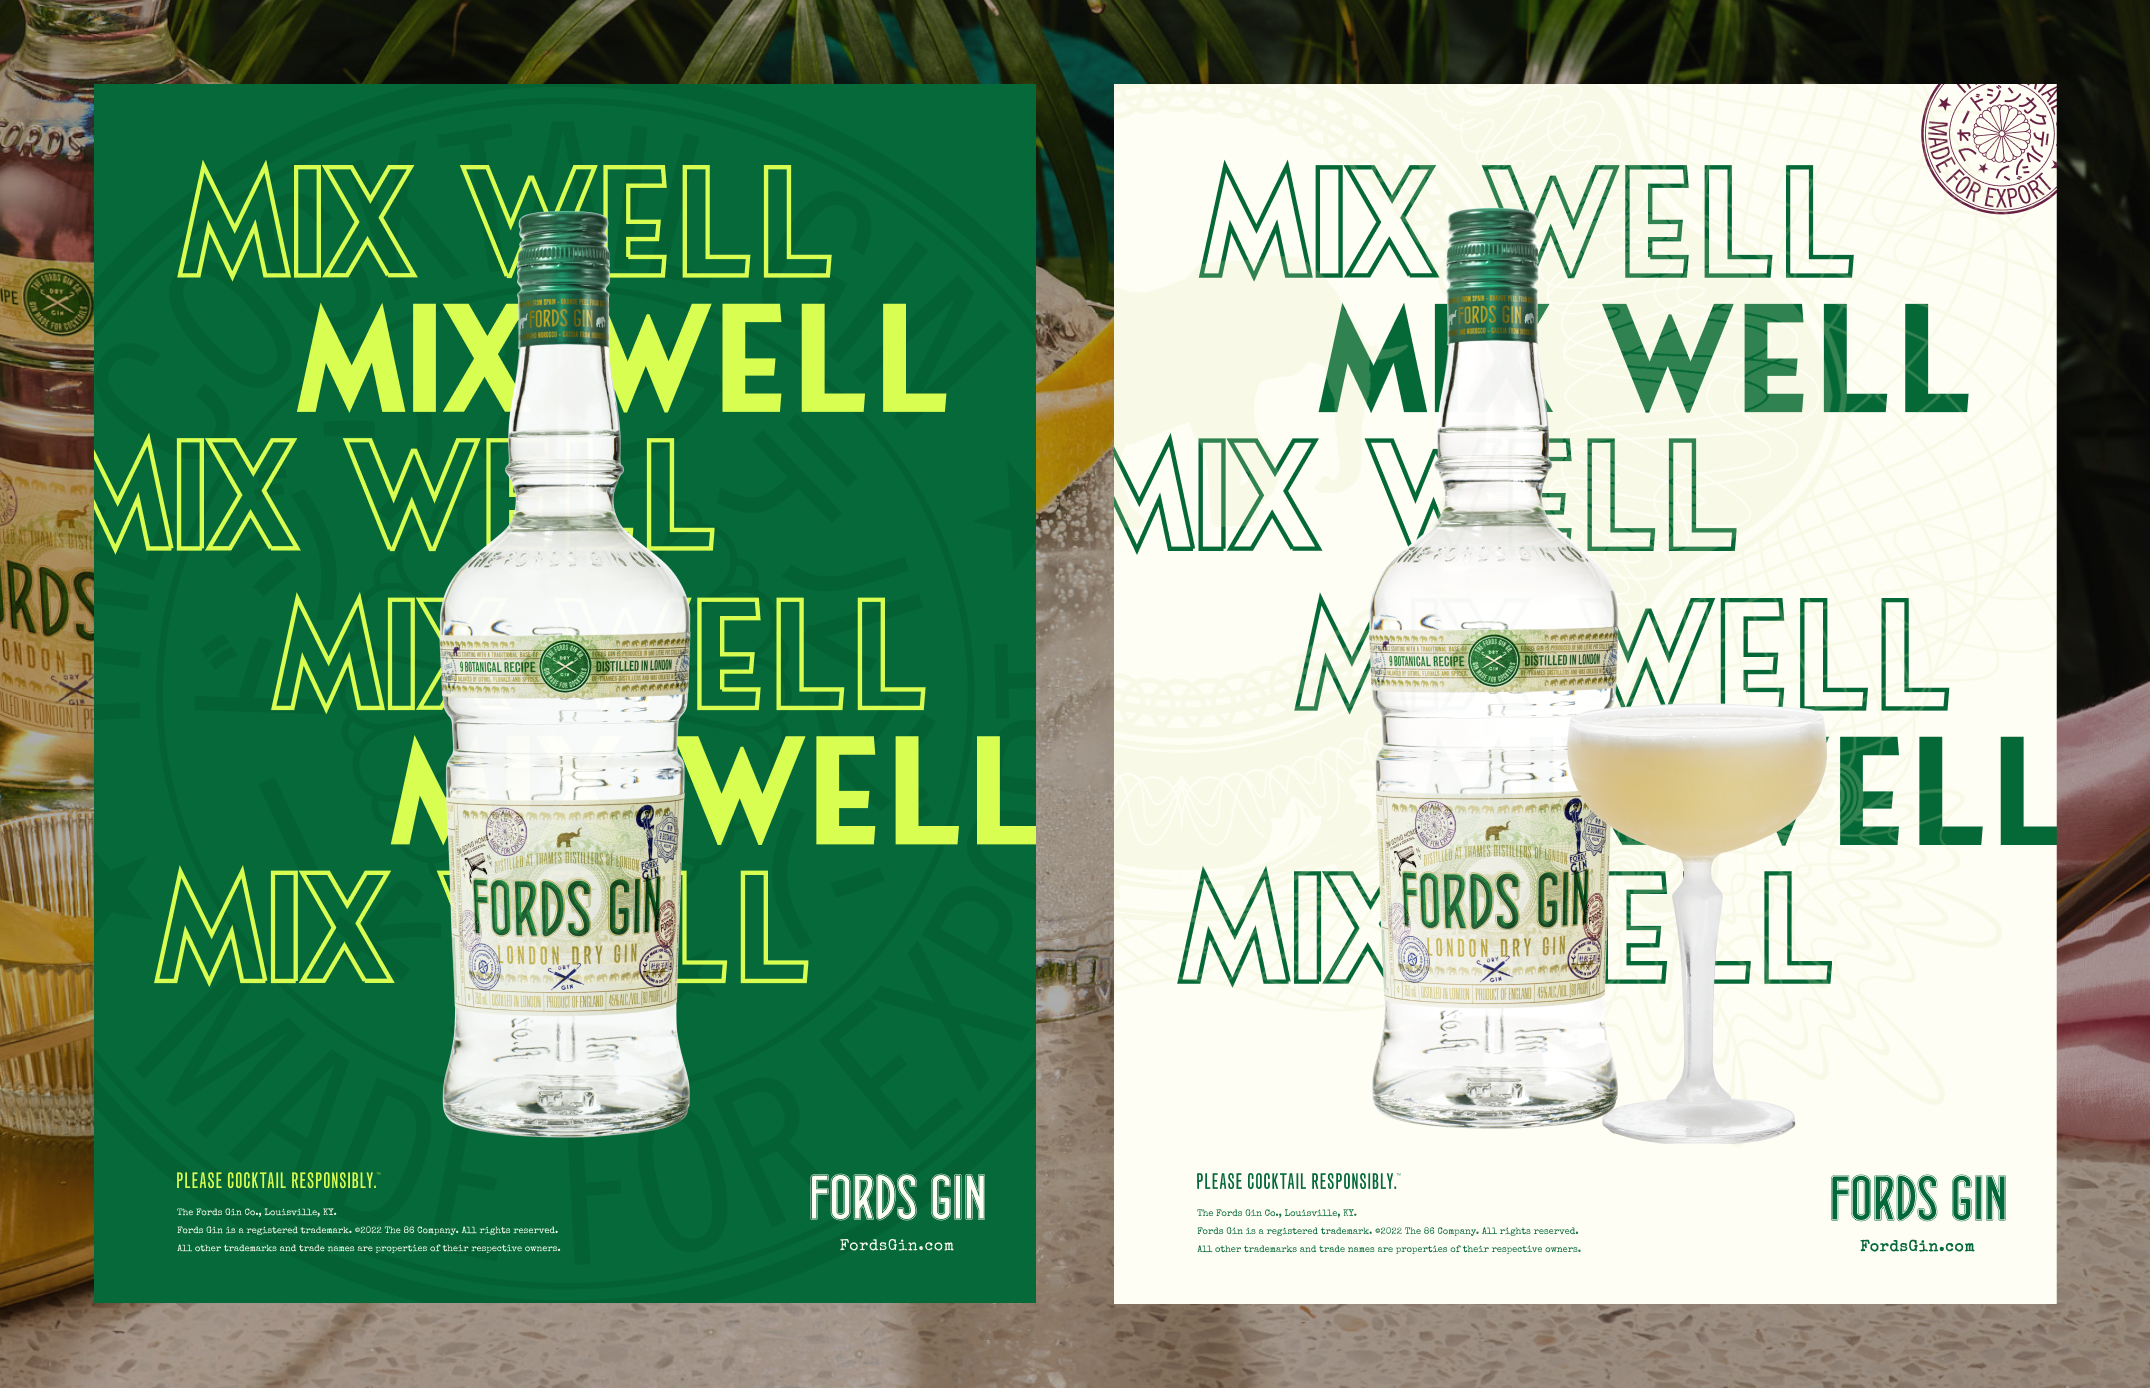 Fords Gin posters featuring in two different colors showcasing the Fords Gin bottle with the headline Mix Well in the background.